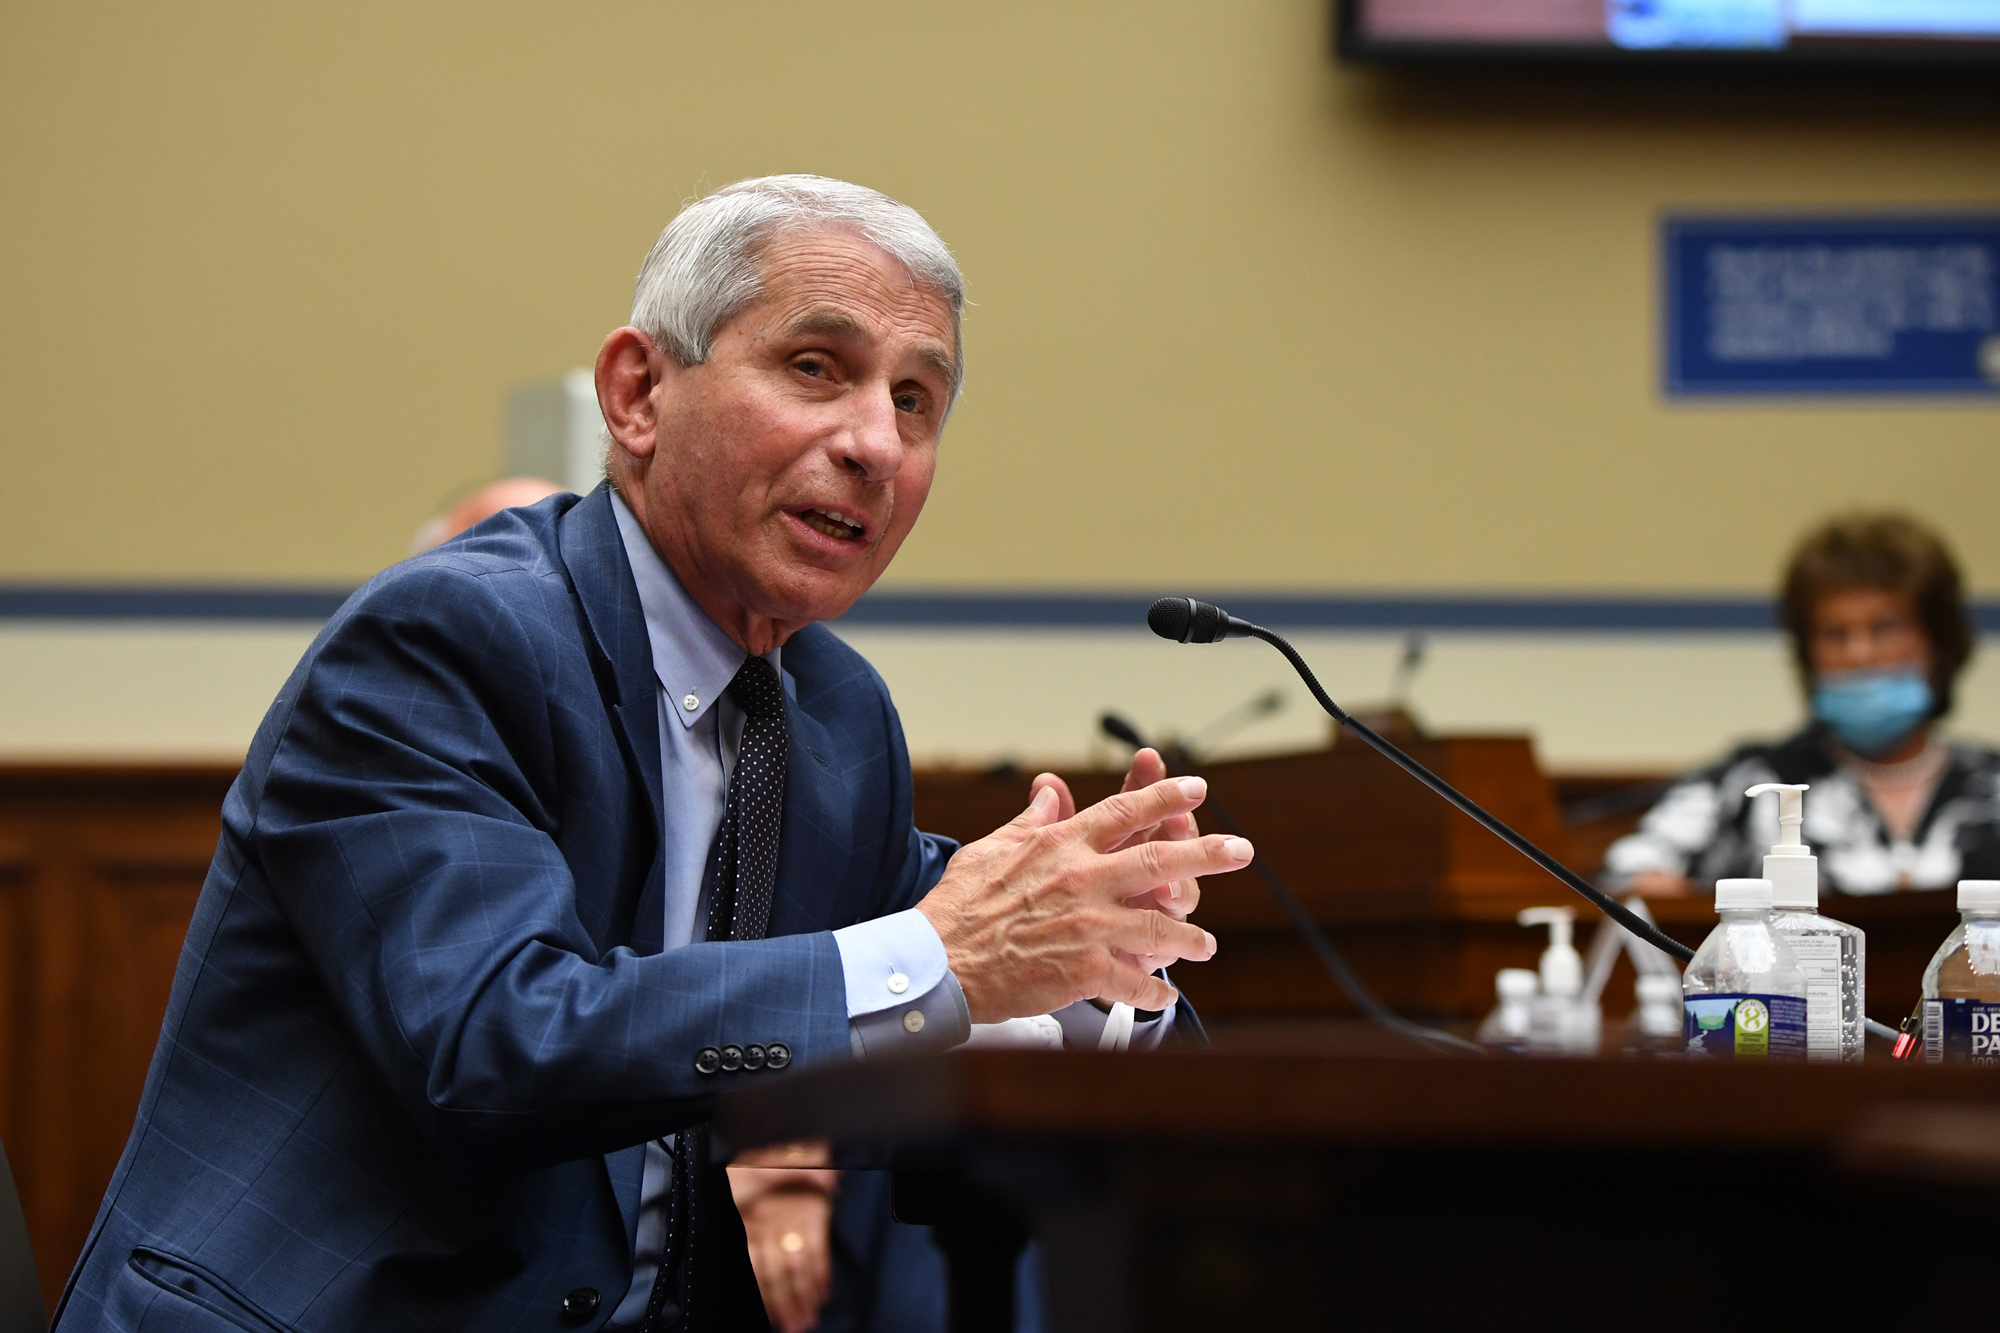 Dr. Anthony Fauci, director of the National Institute for Allergy and Infectious Diseases, testifies before a House Subcommittee on the Coronavirus Crisis hearing on July 31 in Washington, DC. 